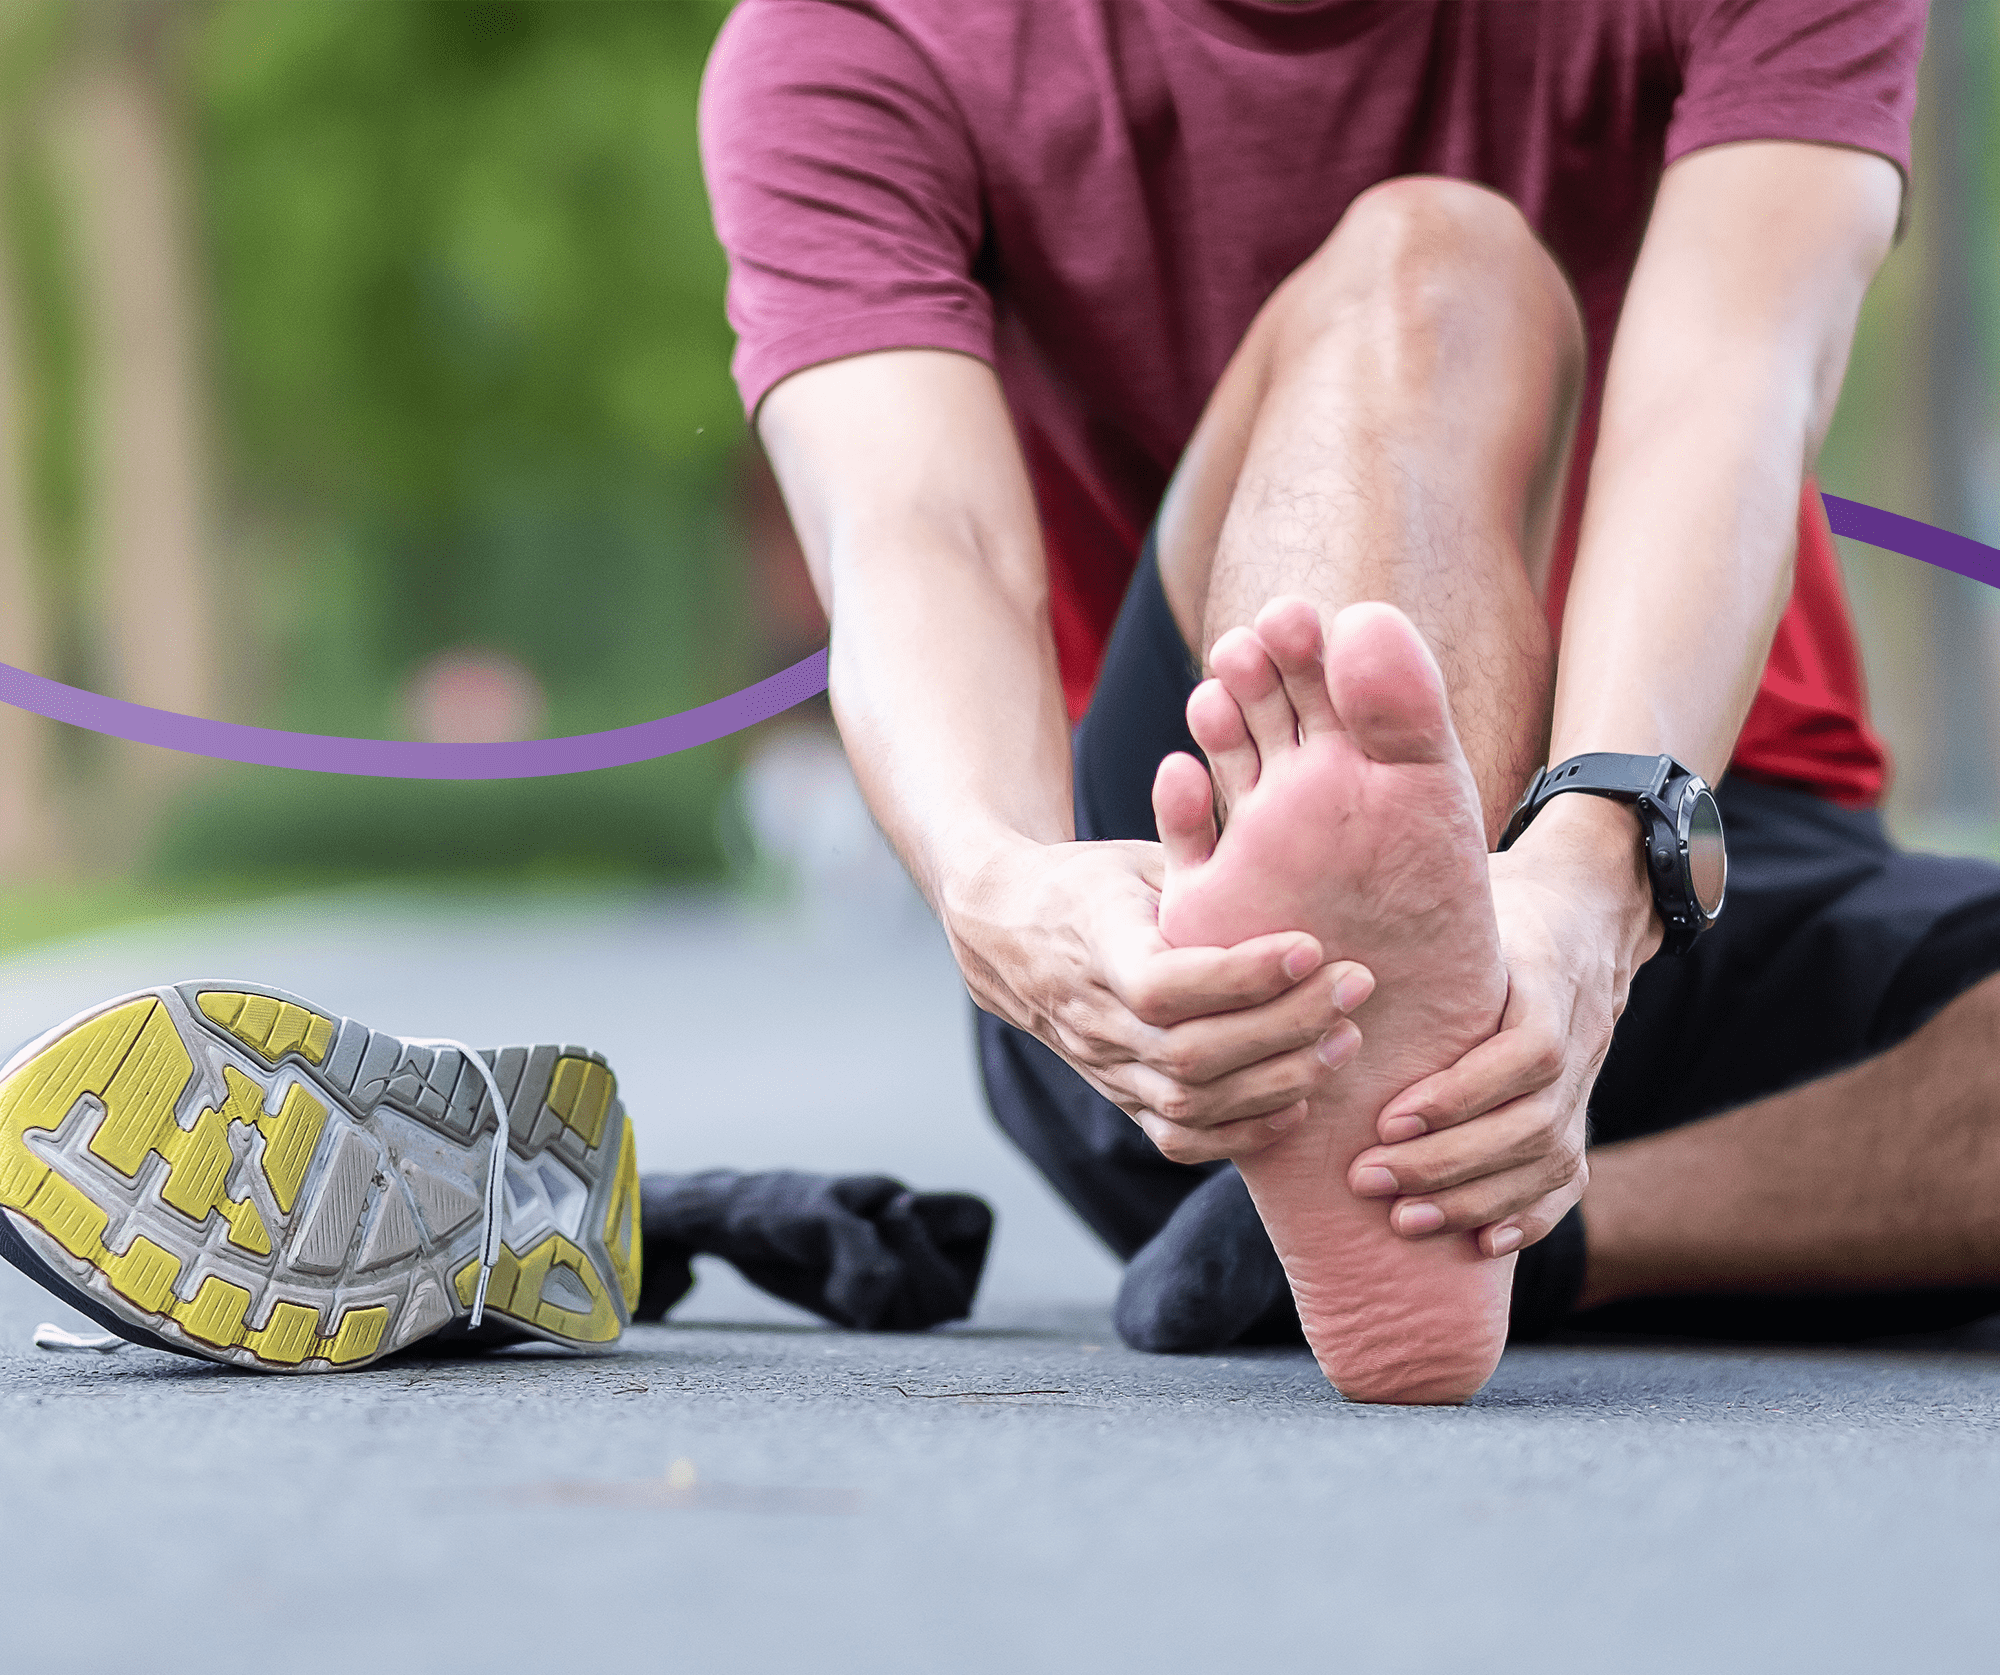 How To Prevent &amp; Treat Athlete's Foot